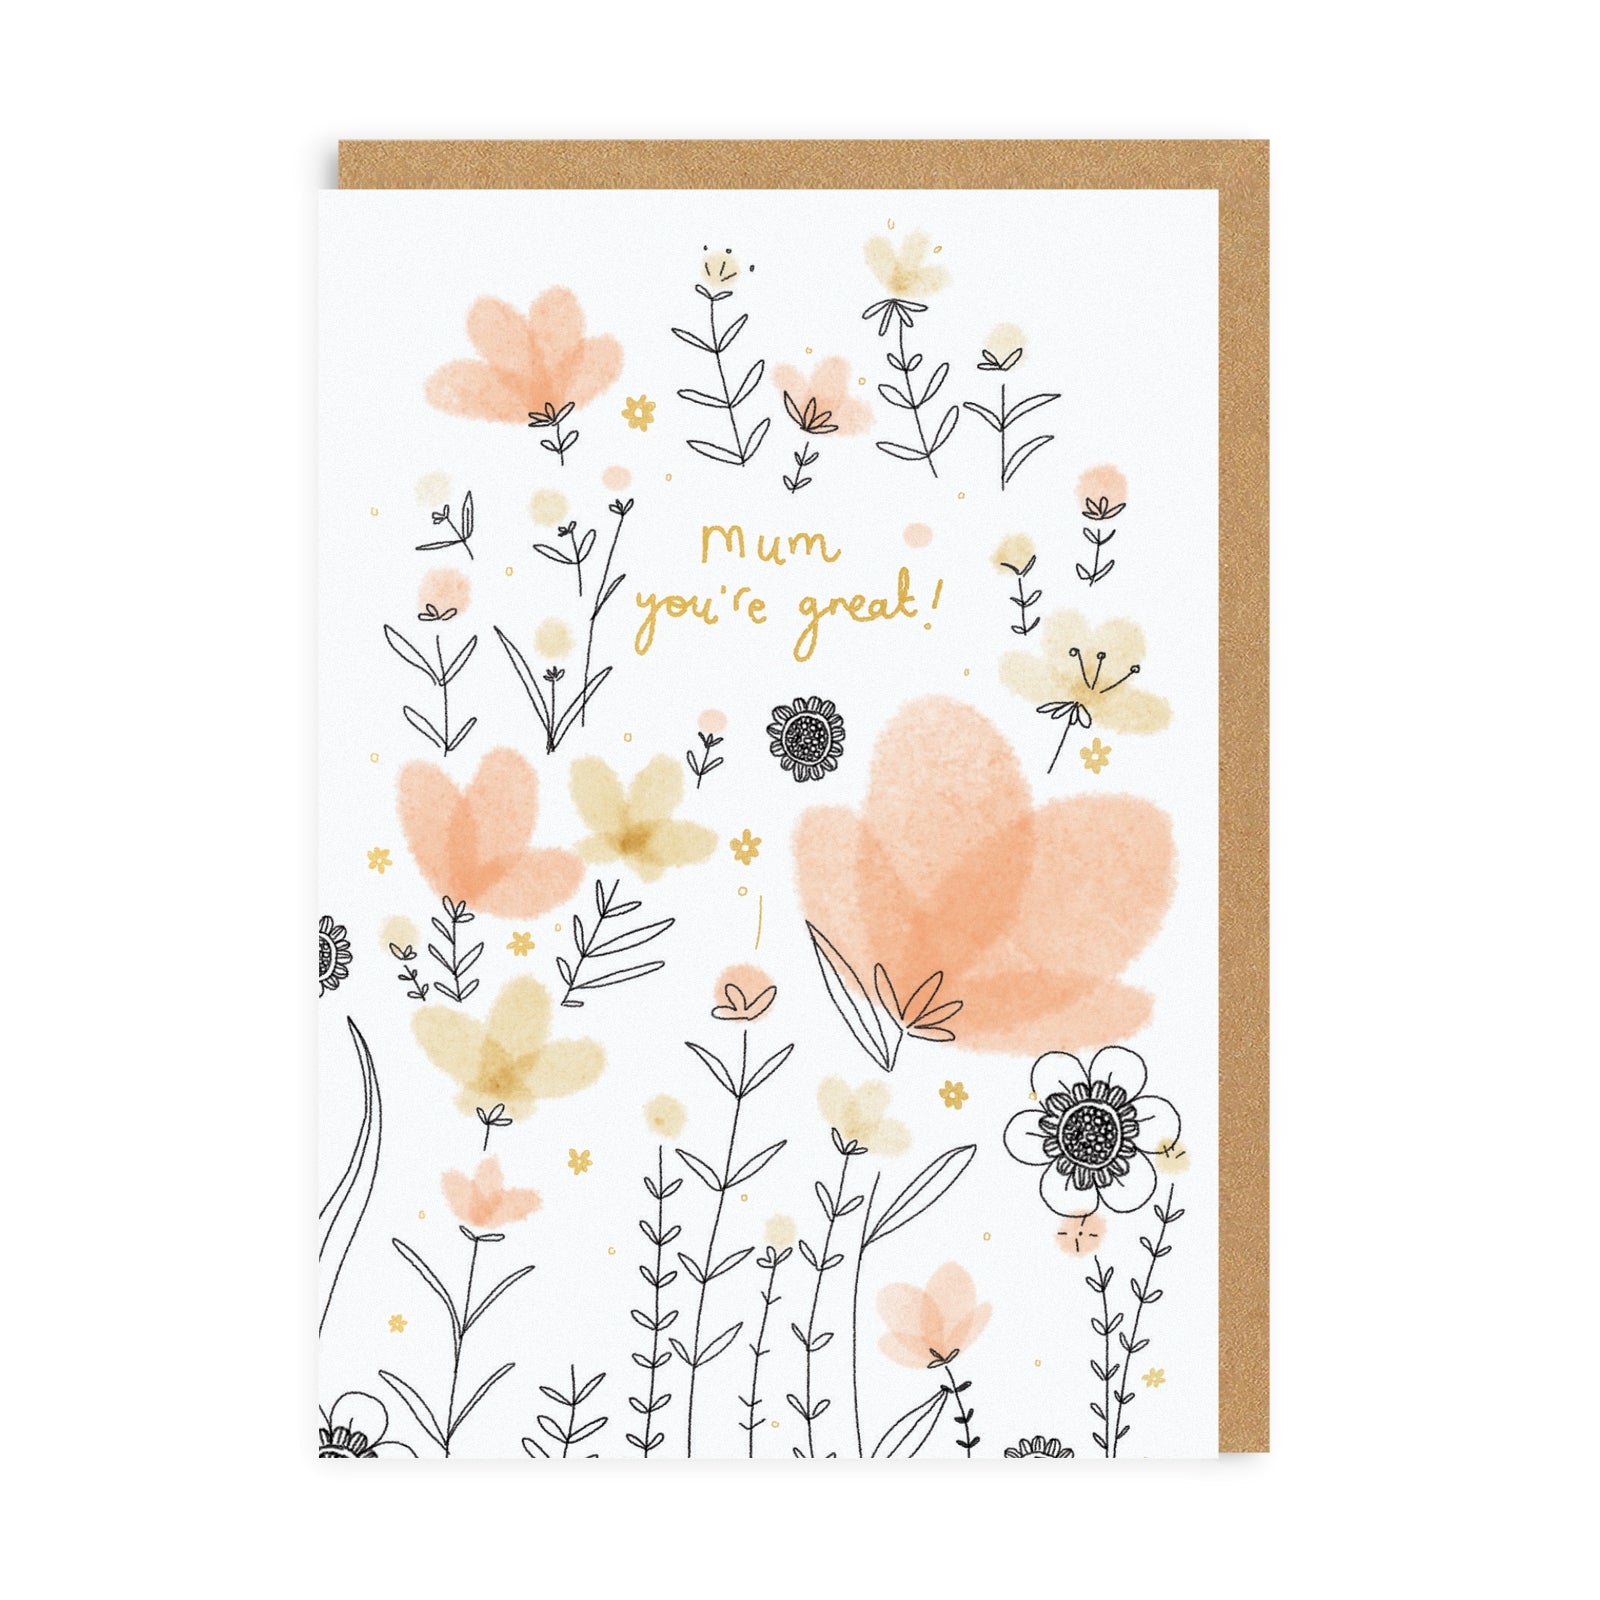 Mum, You're Great! Greeting Card